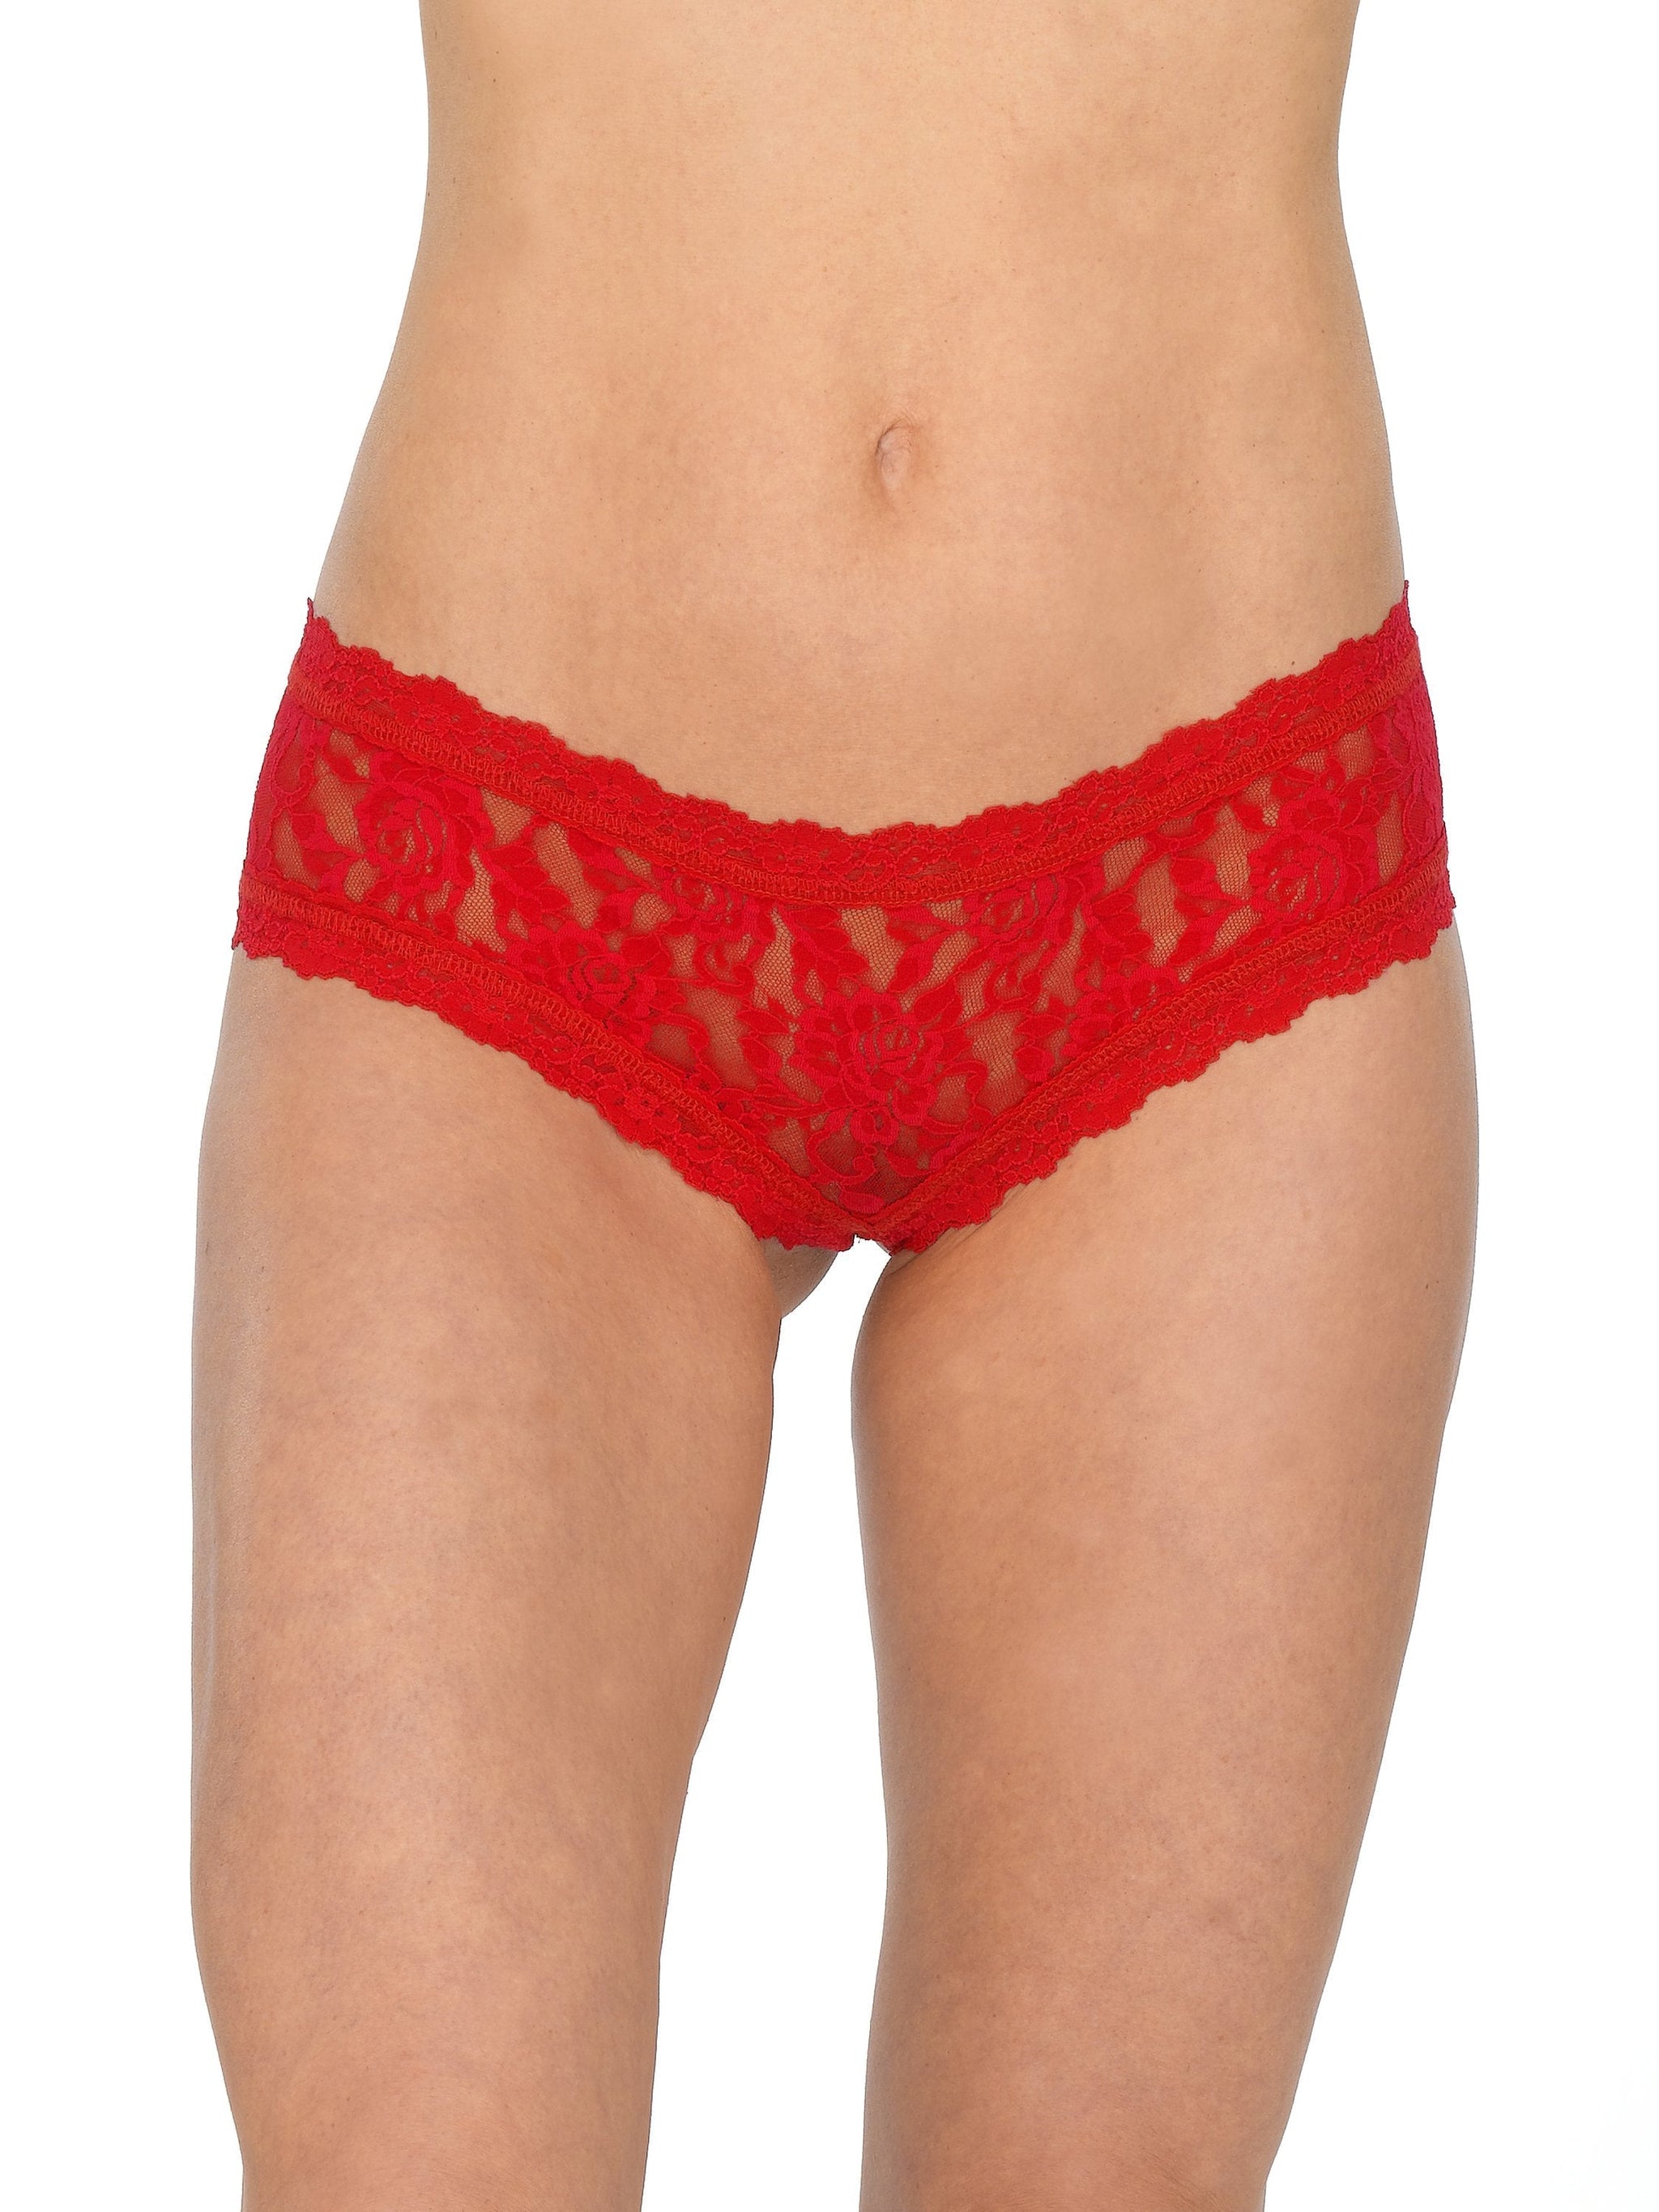 Arizona Body 3-pc. Seamless Multi-Pack Hipster Panty, Color: Red